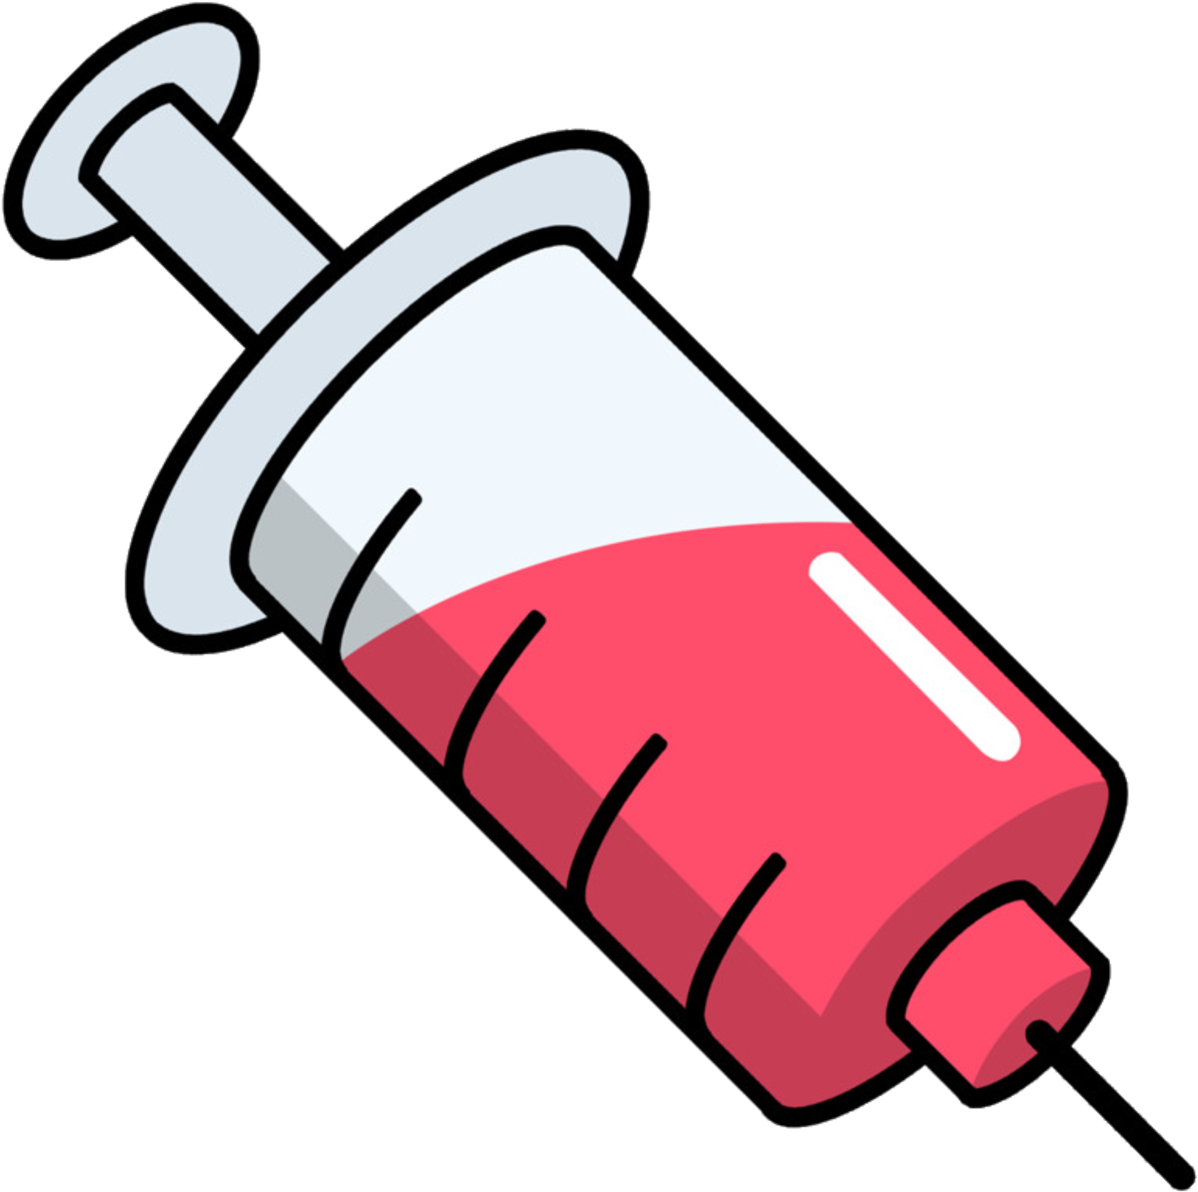 A Cartoon Of A Syringe With A Red Liquid